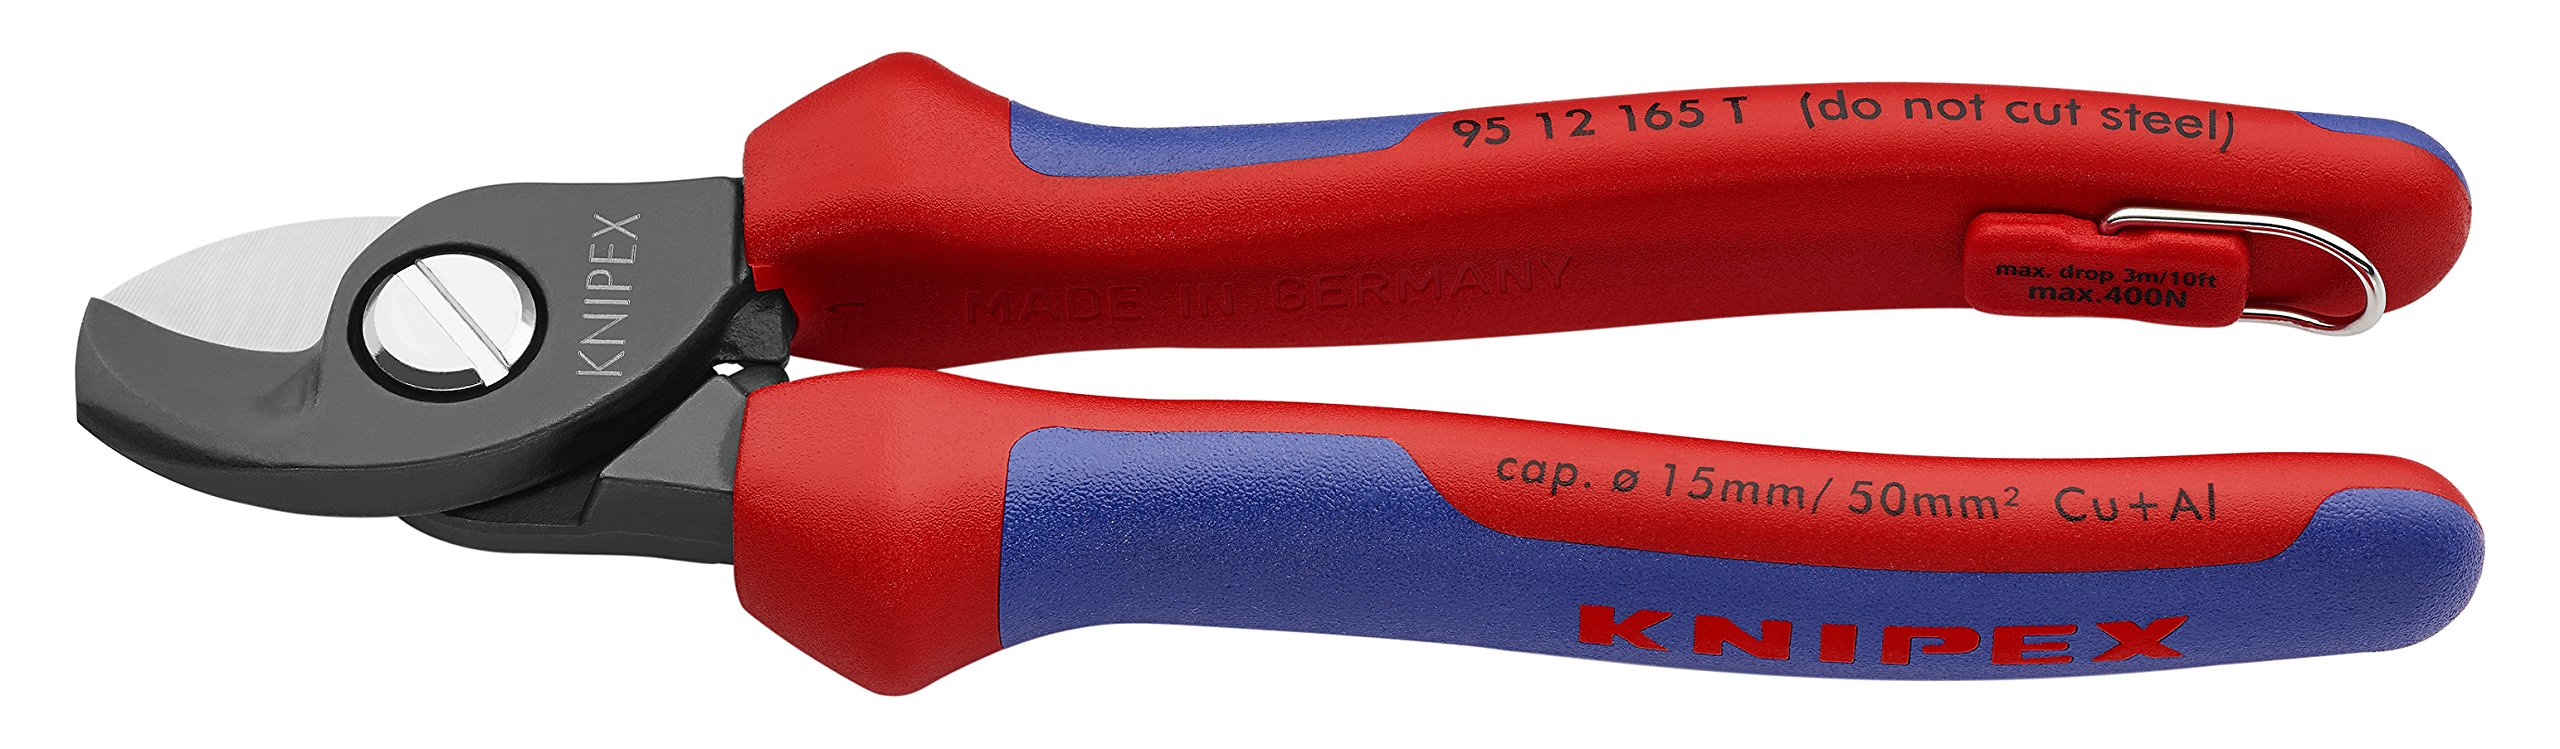 KNIPEX Tools - Cable Shears Twin Cutting Edge Multi-Component Tethered Attachment 9512165TBKA並行輸入品